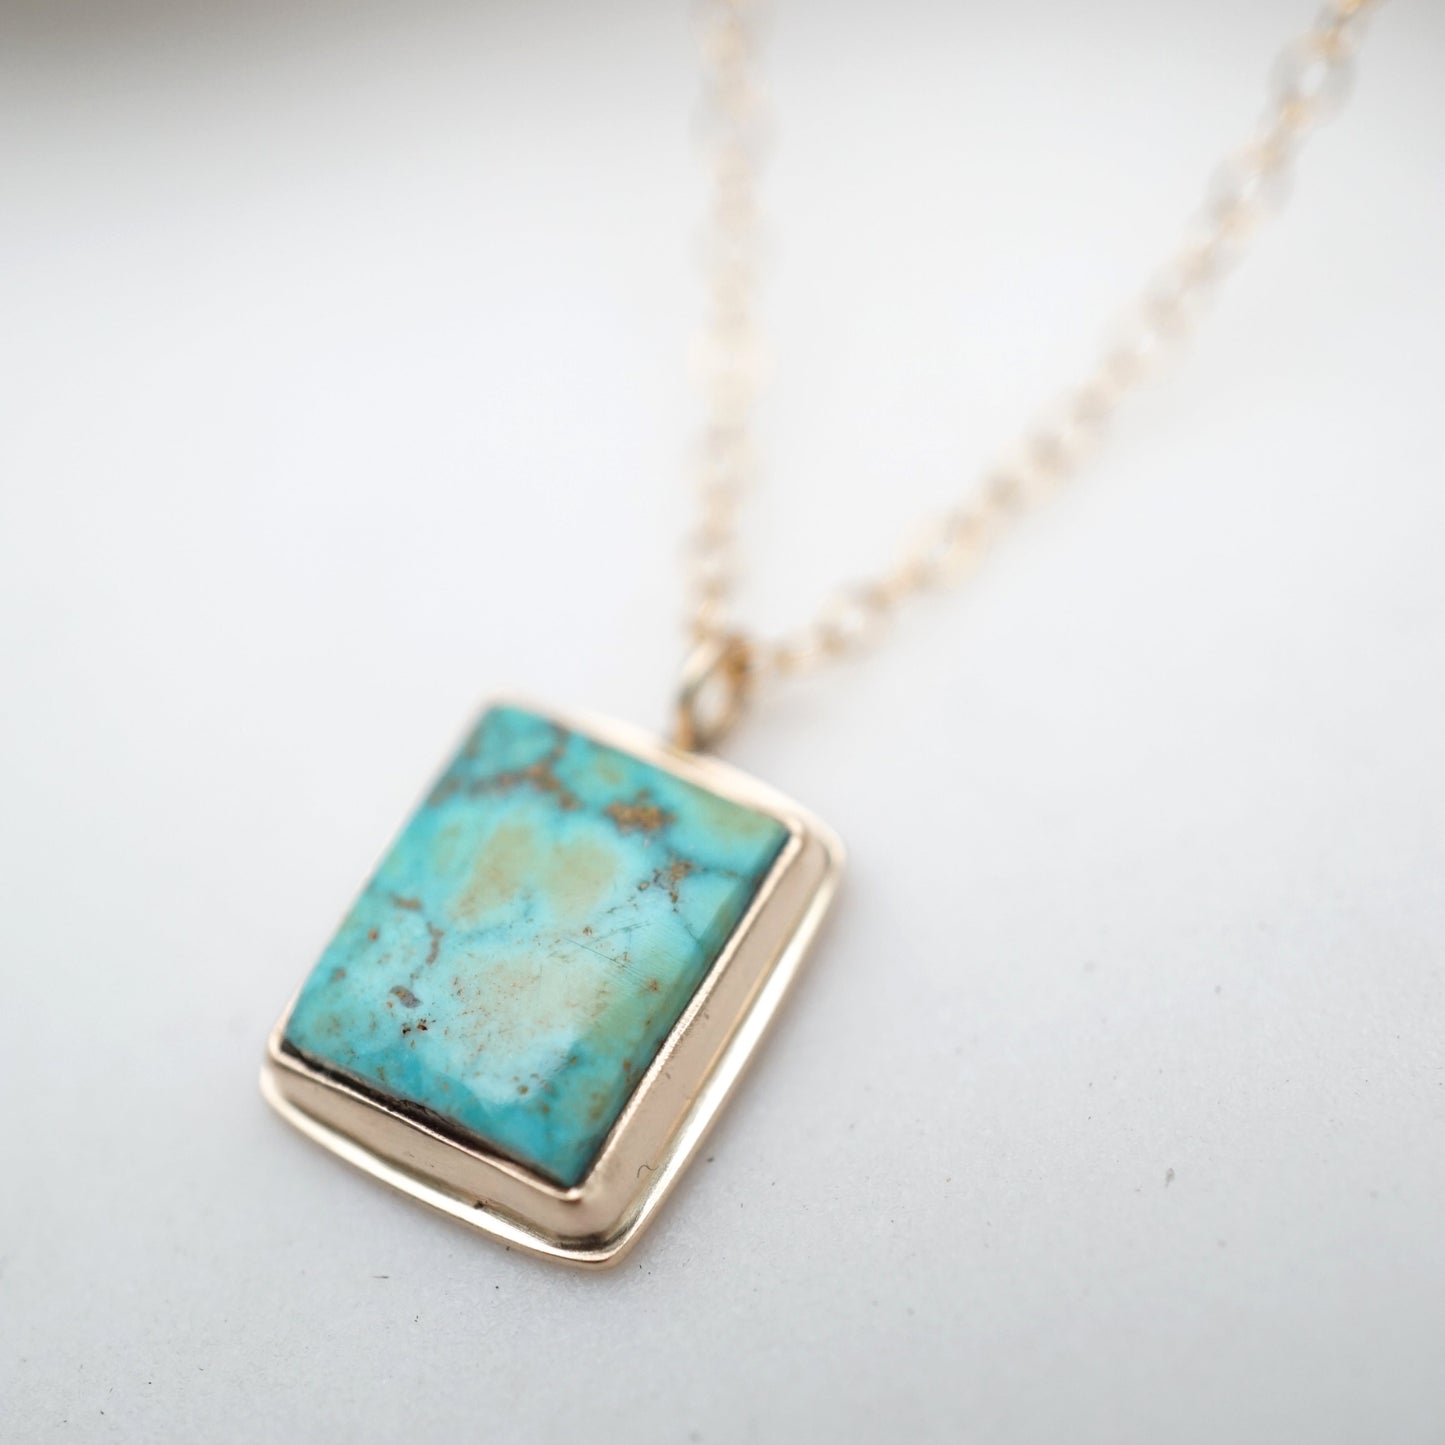 dainty turquoise mountain turquoise + 14k goldfill necklace - 18" chain - Lumenrose